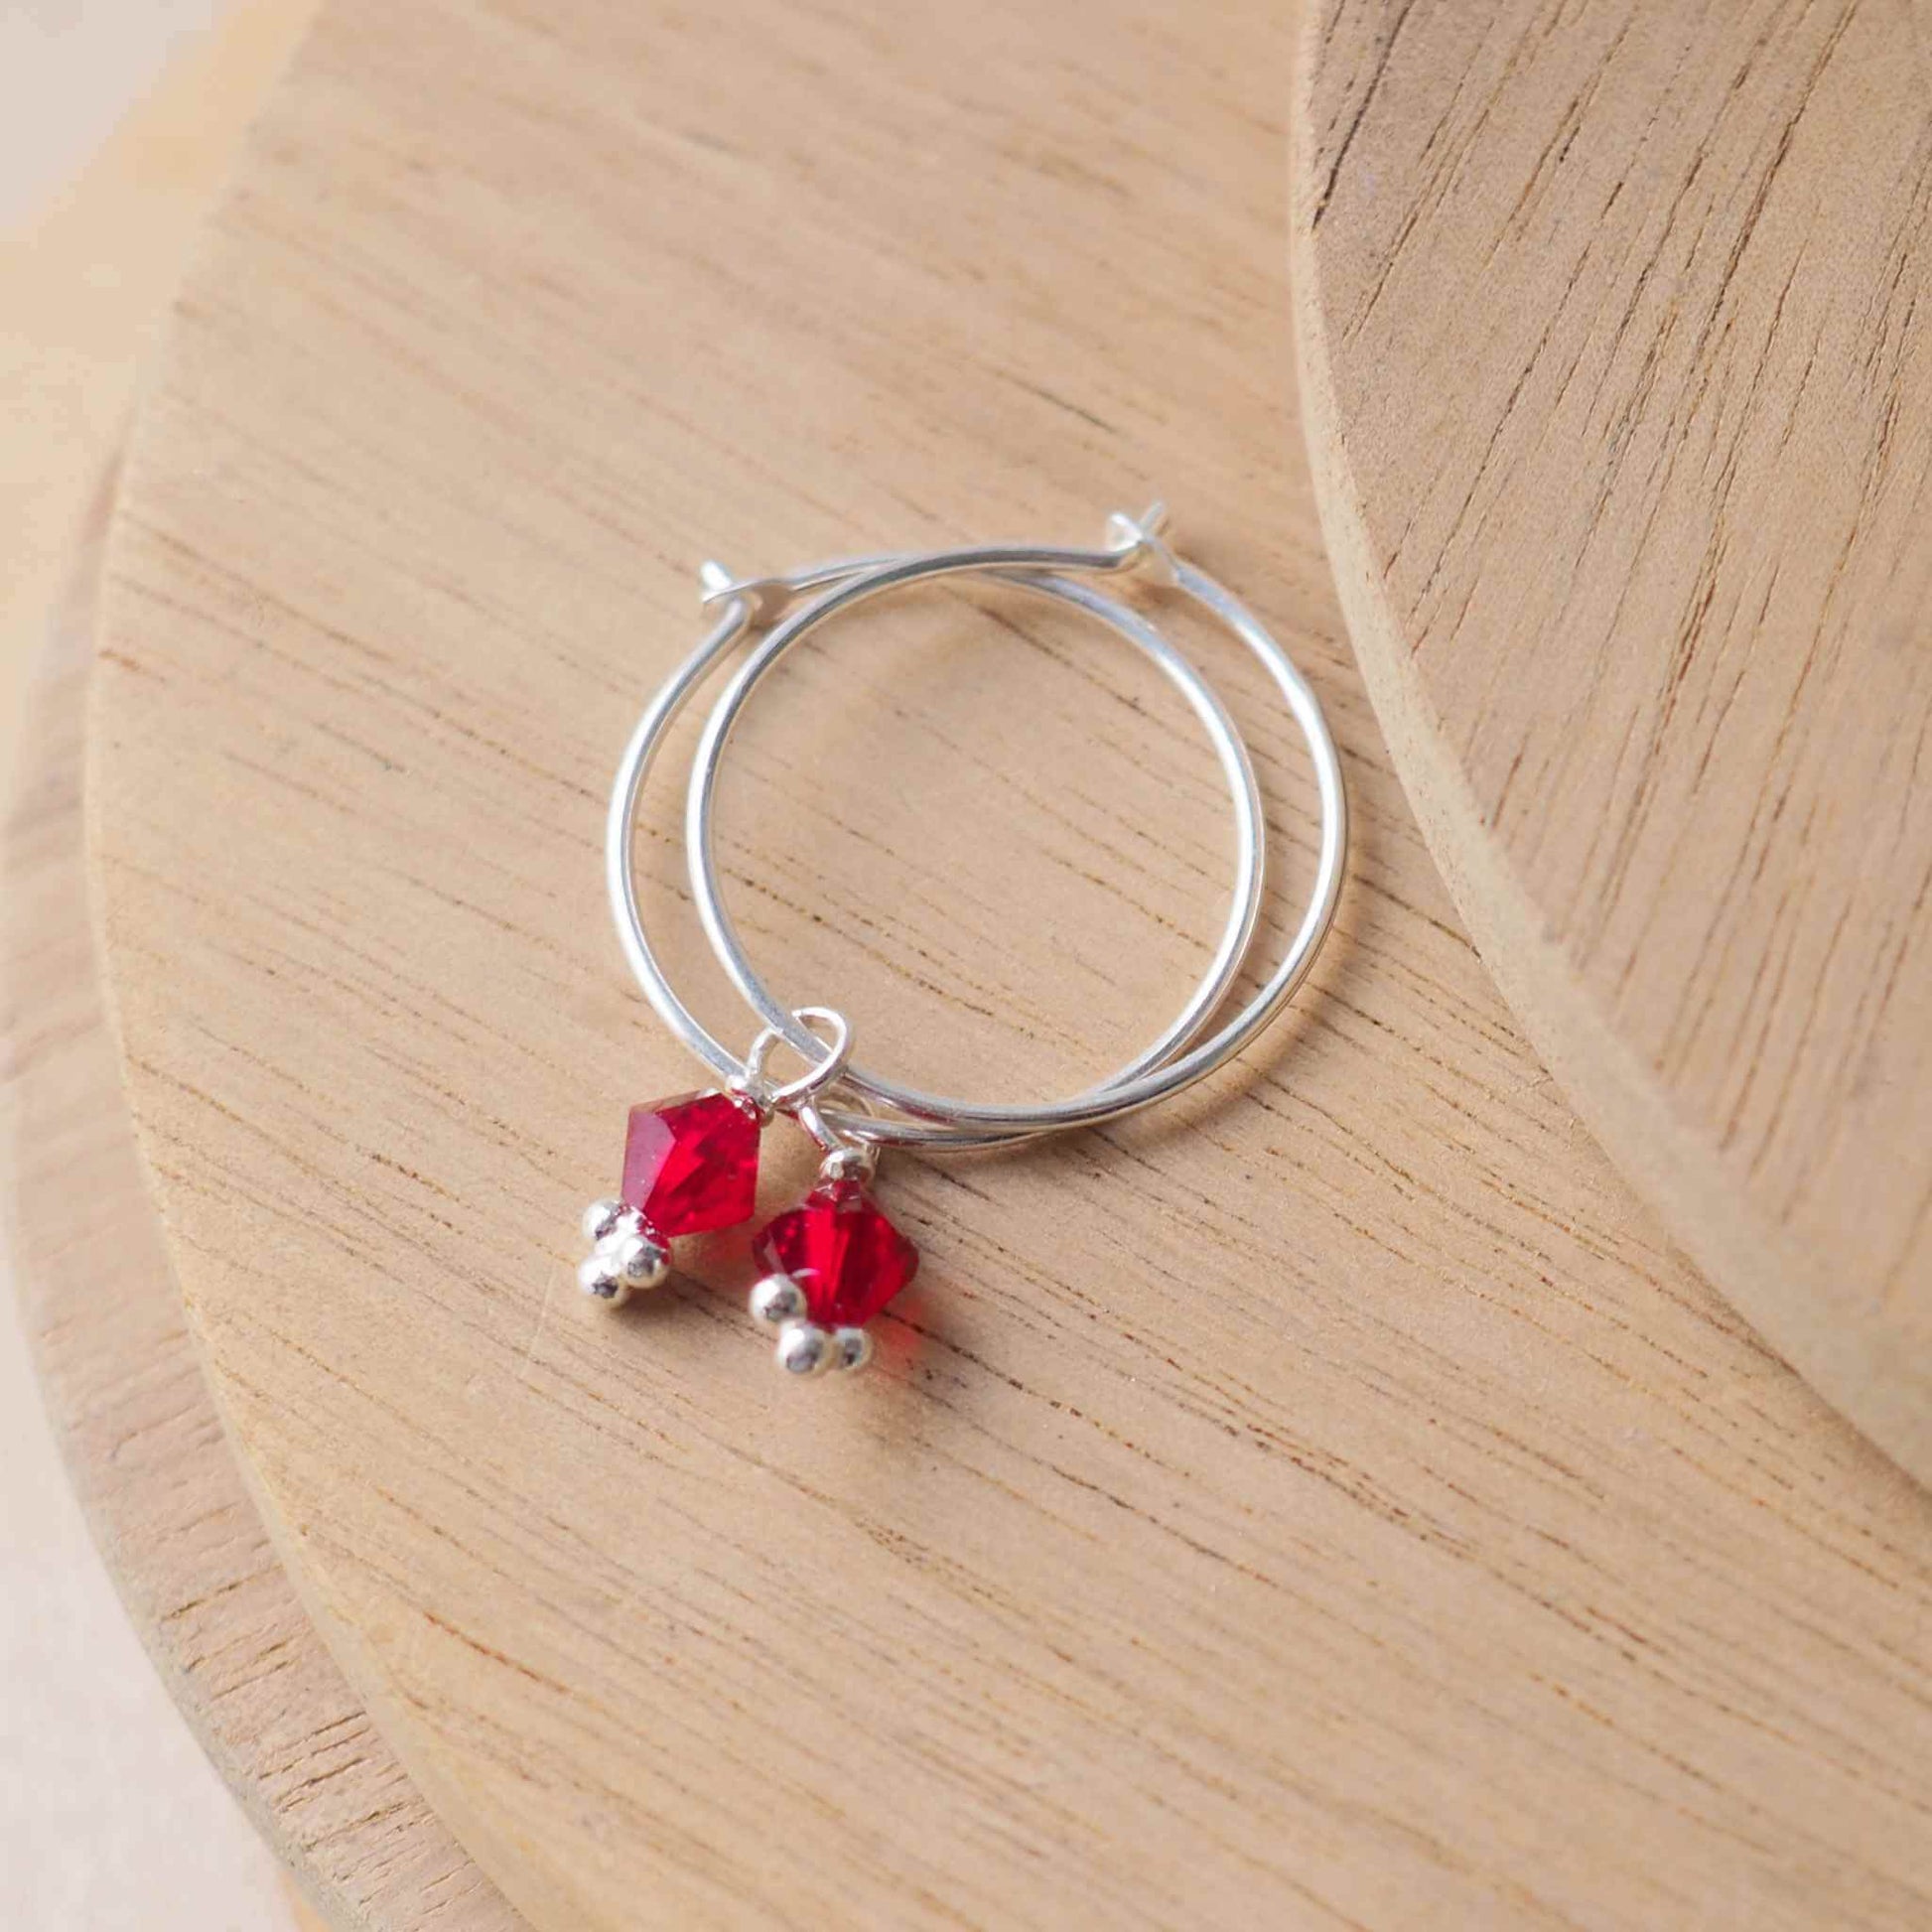 Red Garnet simple birthstone hoop earrings with a thin sterling silver wire hoop with a single small red crystal. Handmade in a small studio in Scotland UK